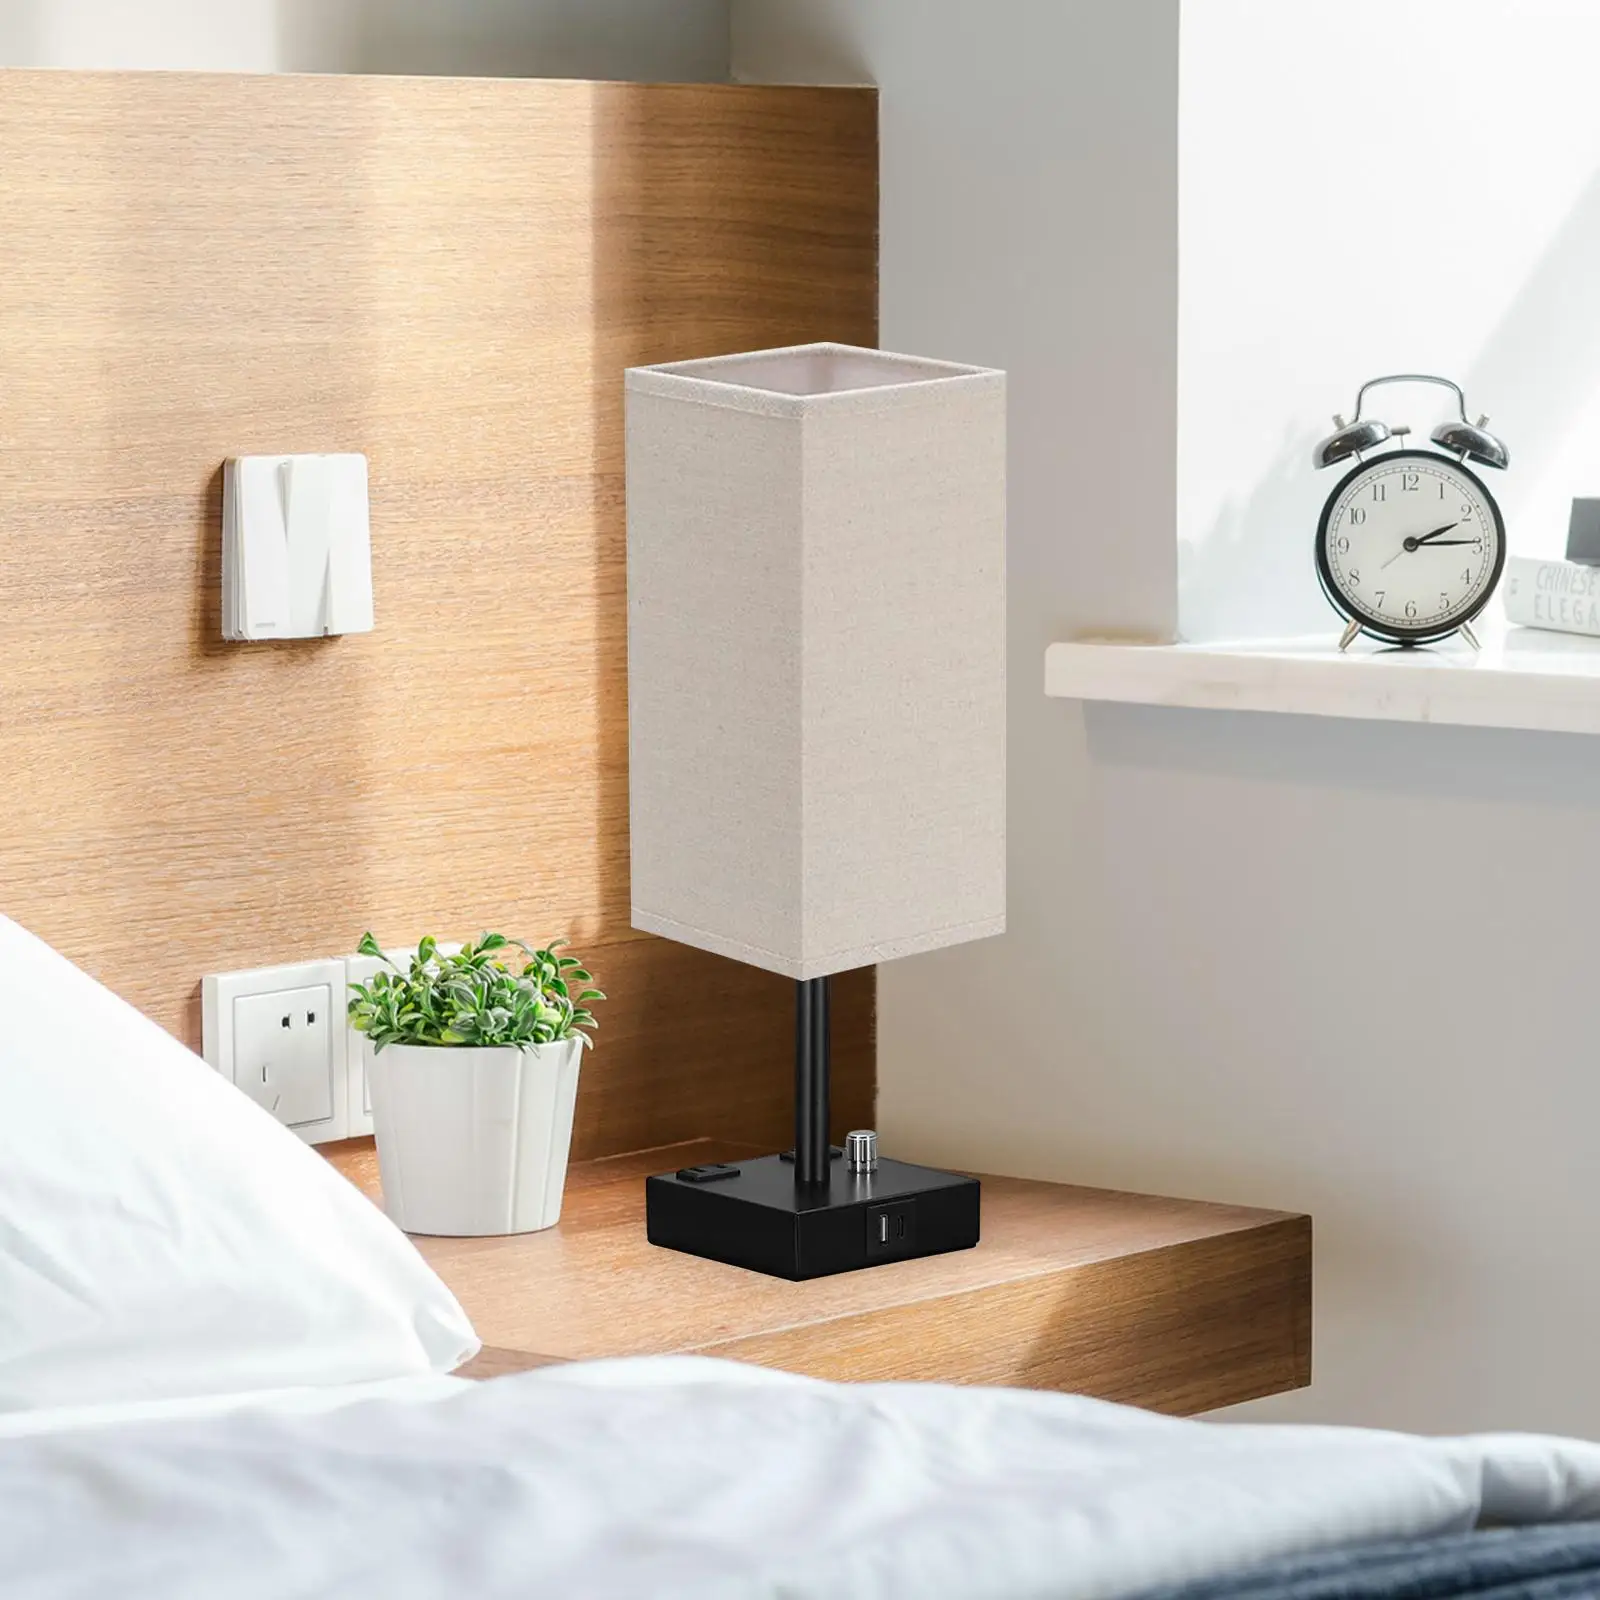 Bedside Lamp with USB Port with Outlet with Black Metal Base Bedroom Lamp